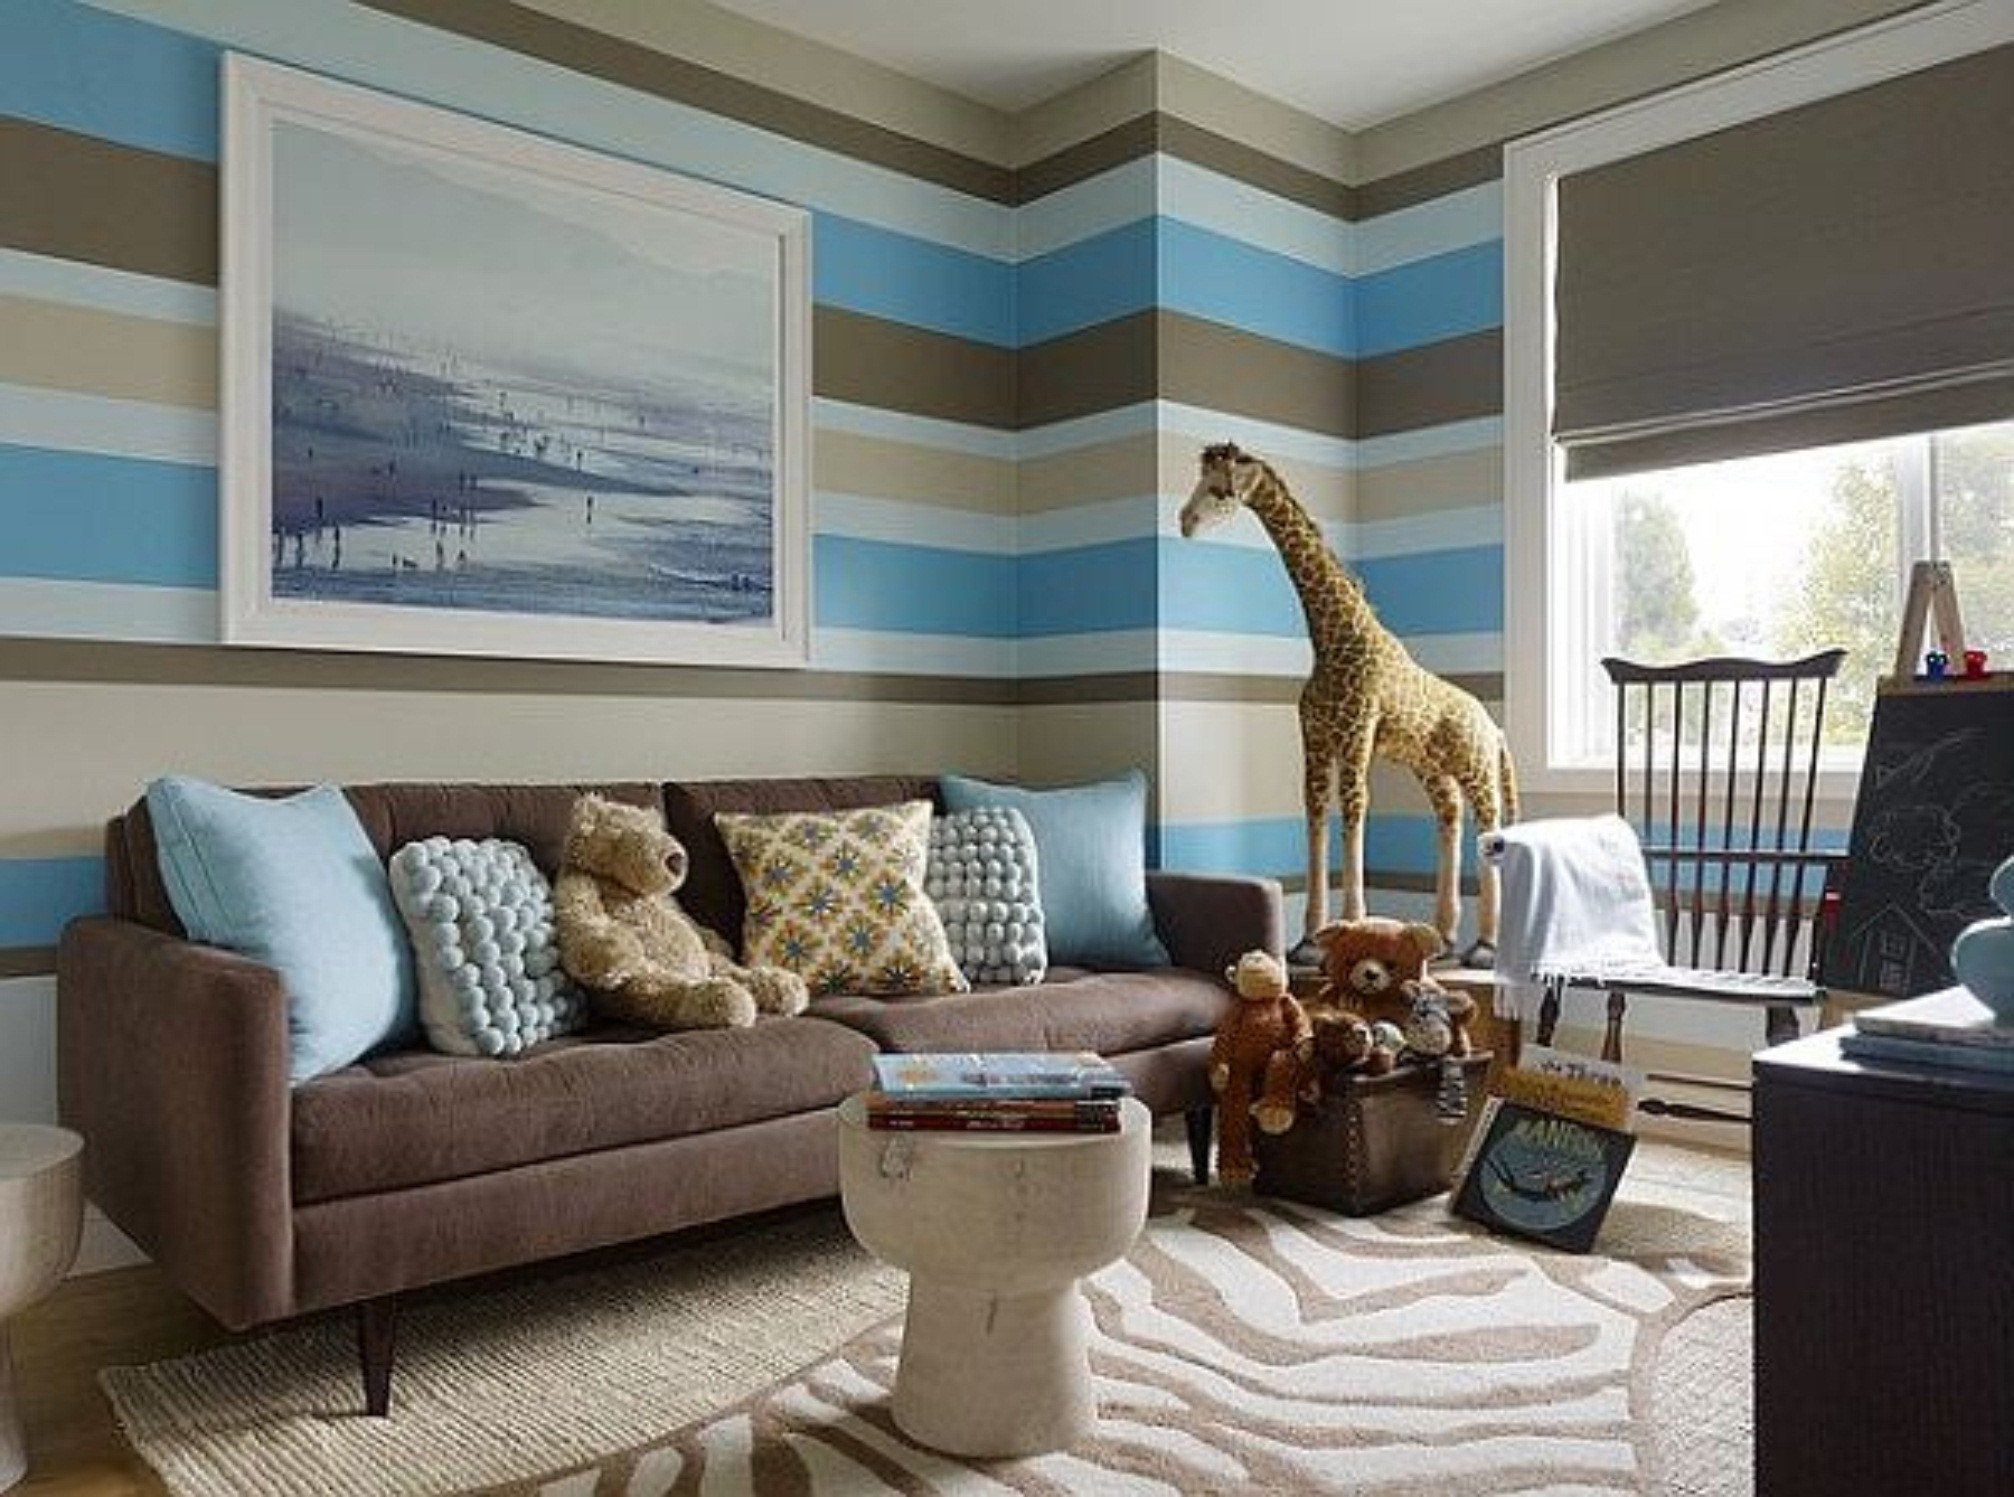 Small Living Roompaint Ideas Best Of Paint Ideas for Living Room with Narrow Space theydesign theydesign